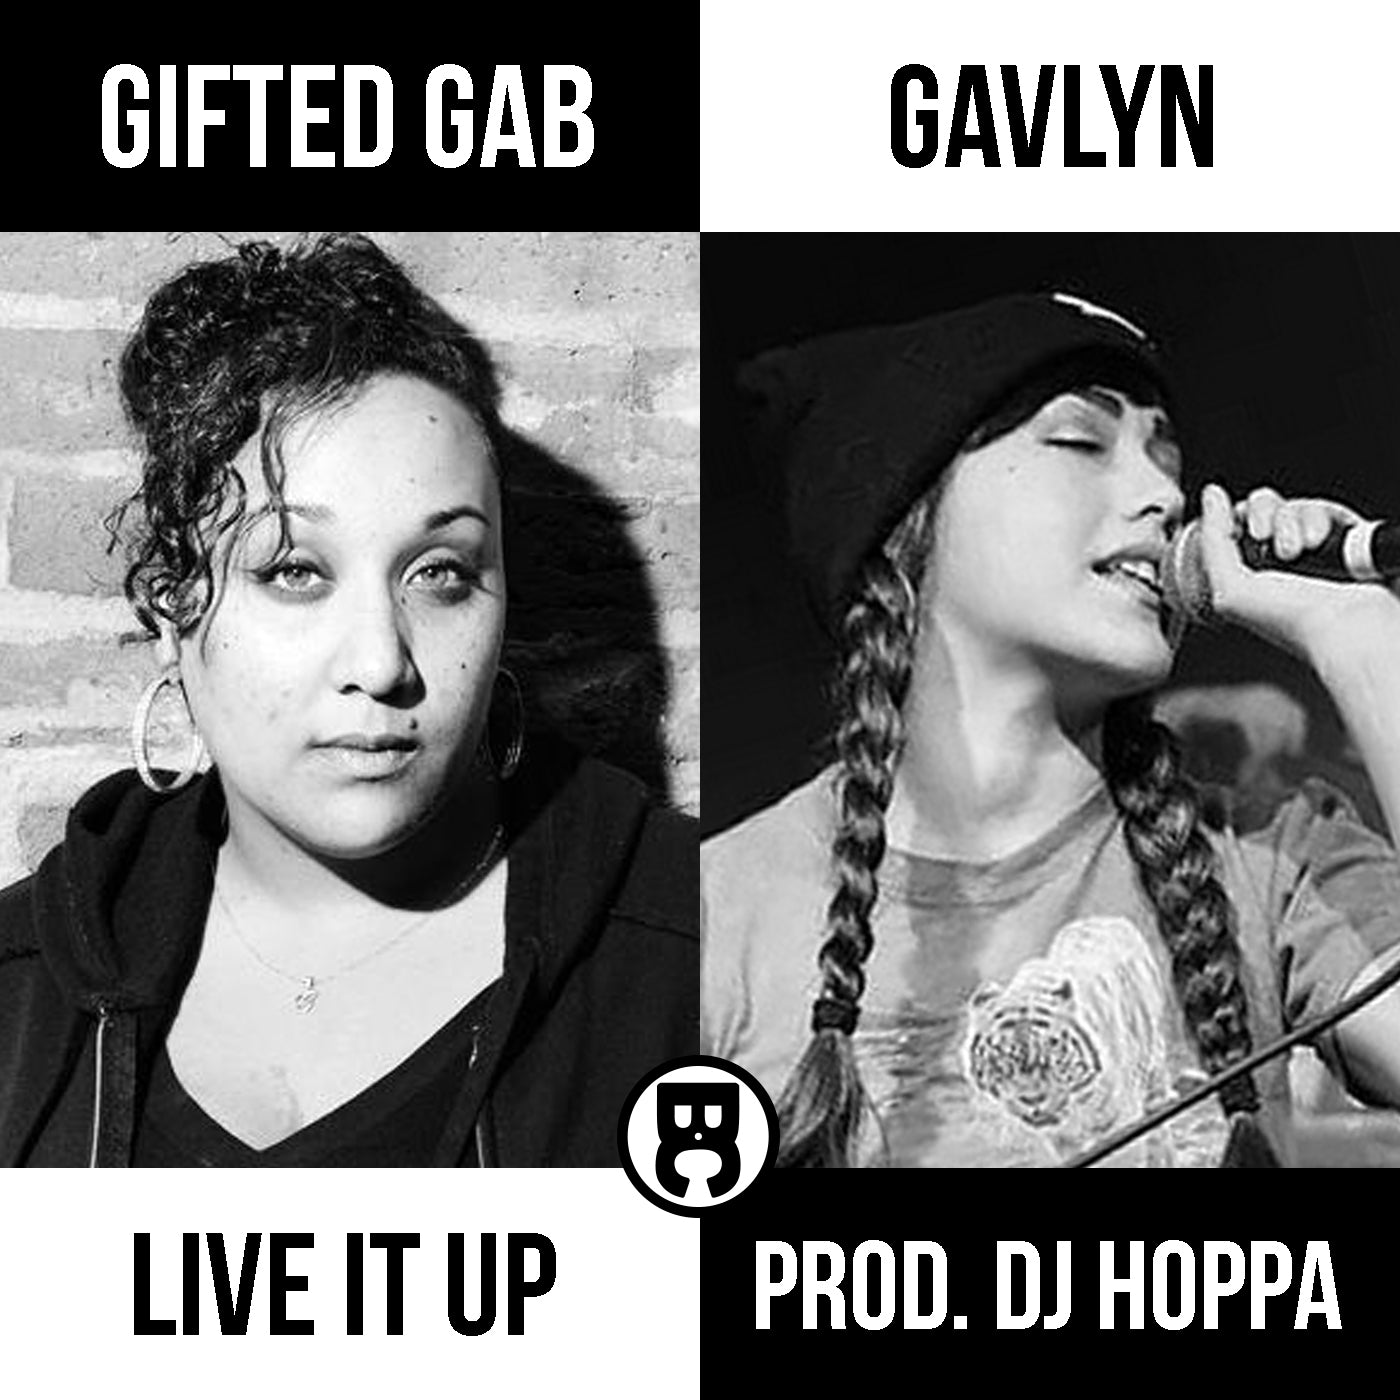 Live it up ft. Gifted Gab (Single)